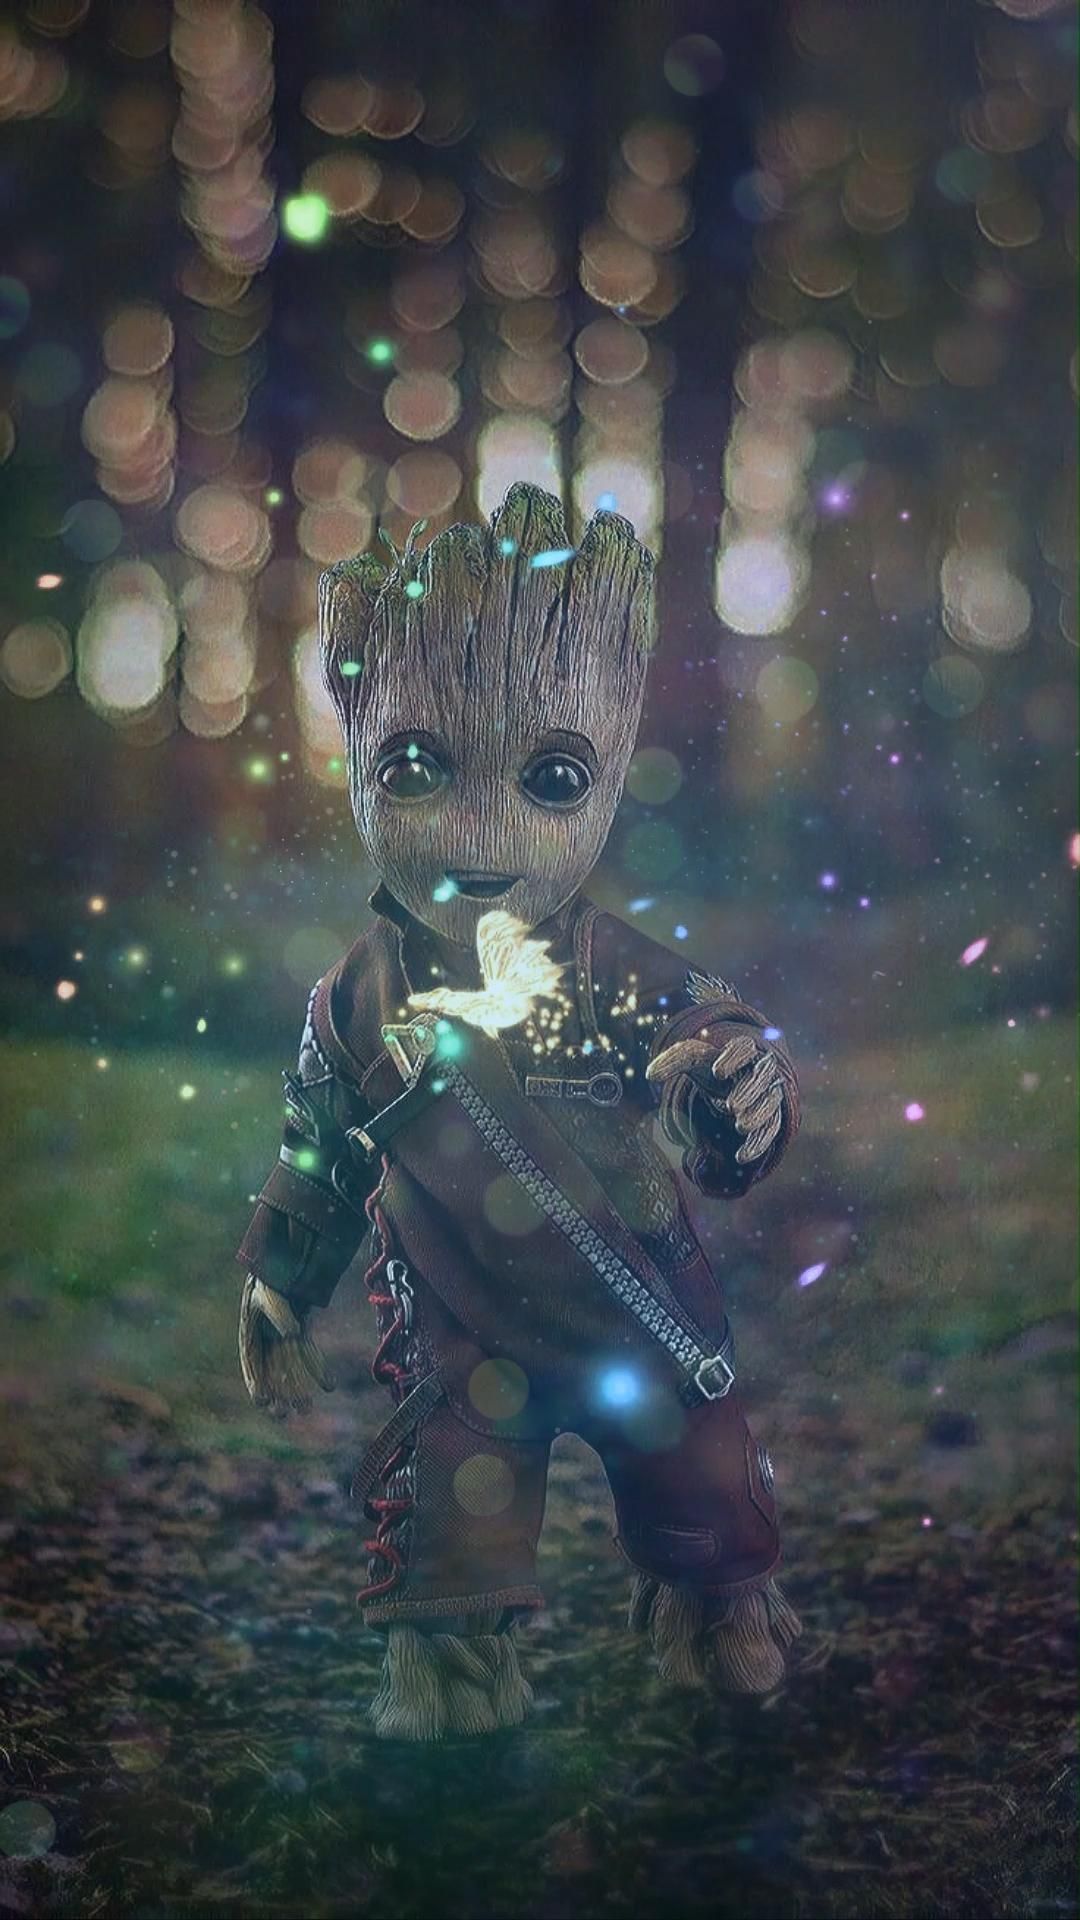 Baby Groot guardians of the galaxy wallpaper for iPhone - Guardians of the Galaxy